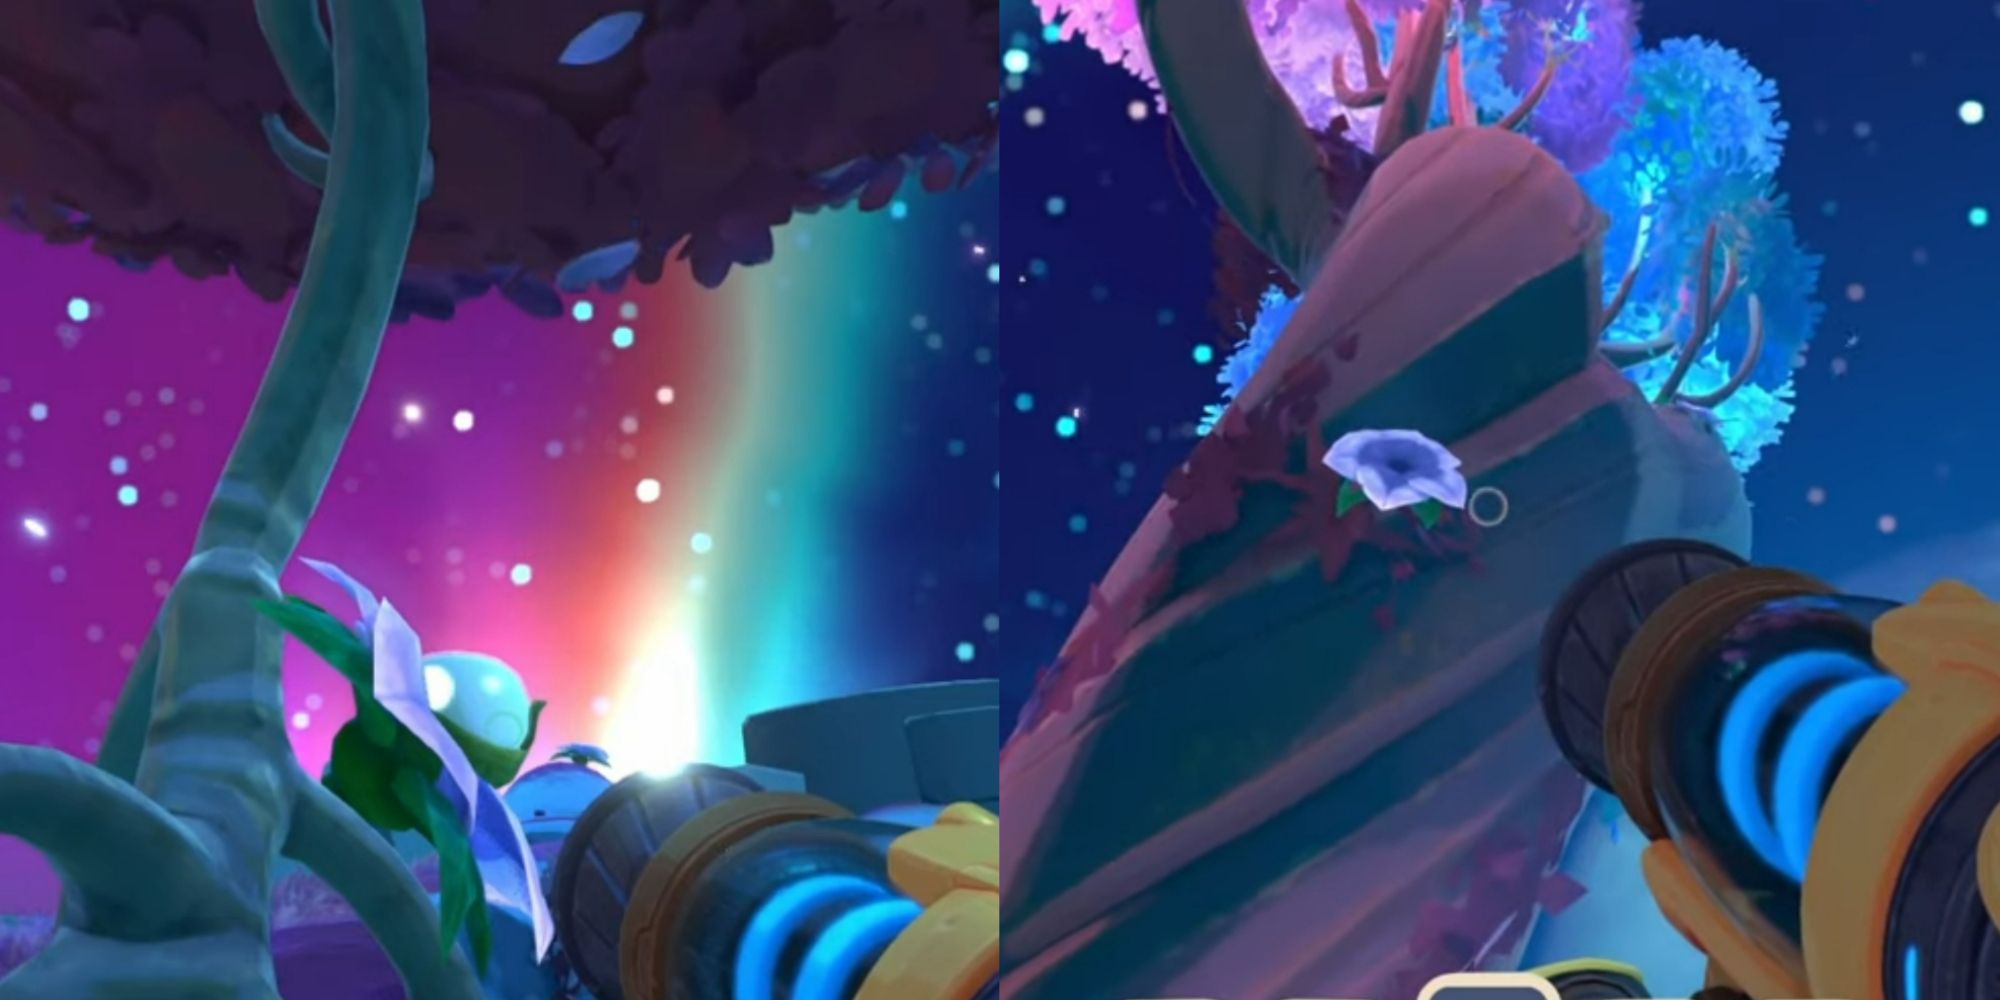 Slime Rancher 2 guide: Where and how to get Moondew Nectar